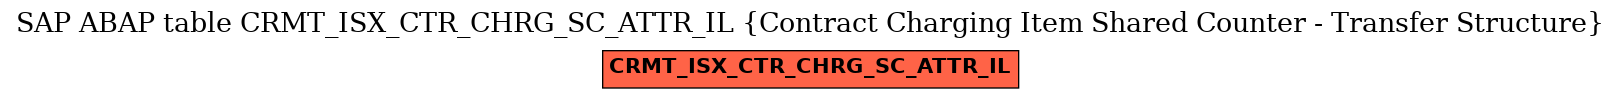 E-R Diagram for table CRMT_ISX_CTR_CHRG_SC_ATTR_IL (Contract Charging Item Shared Counter - Transfer Structure)